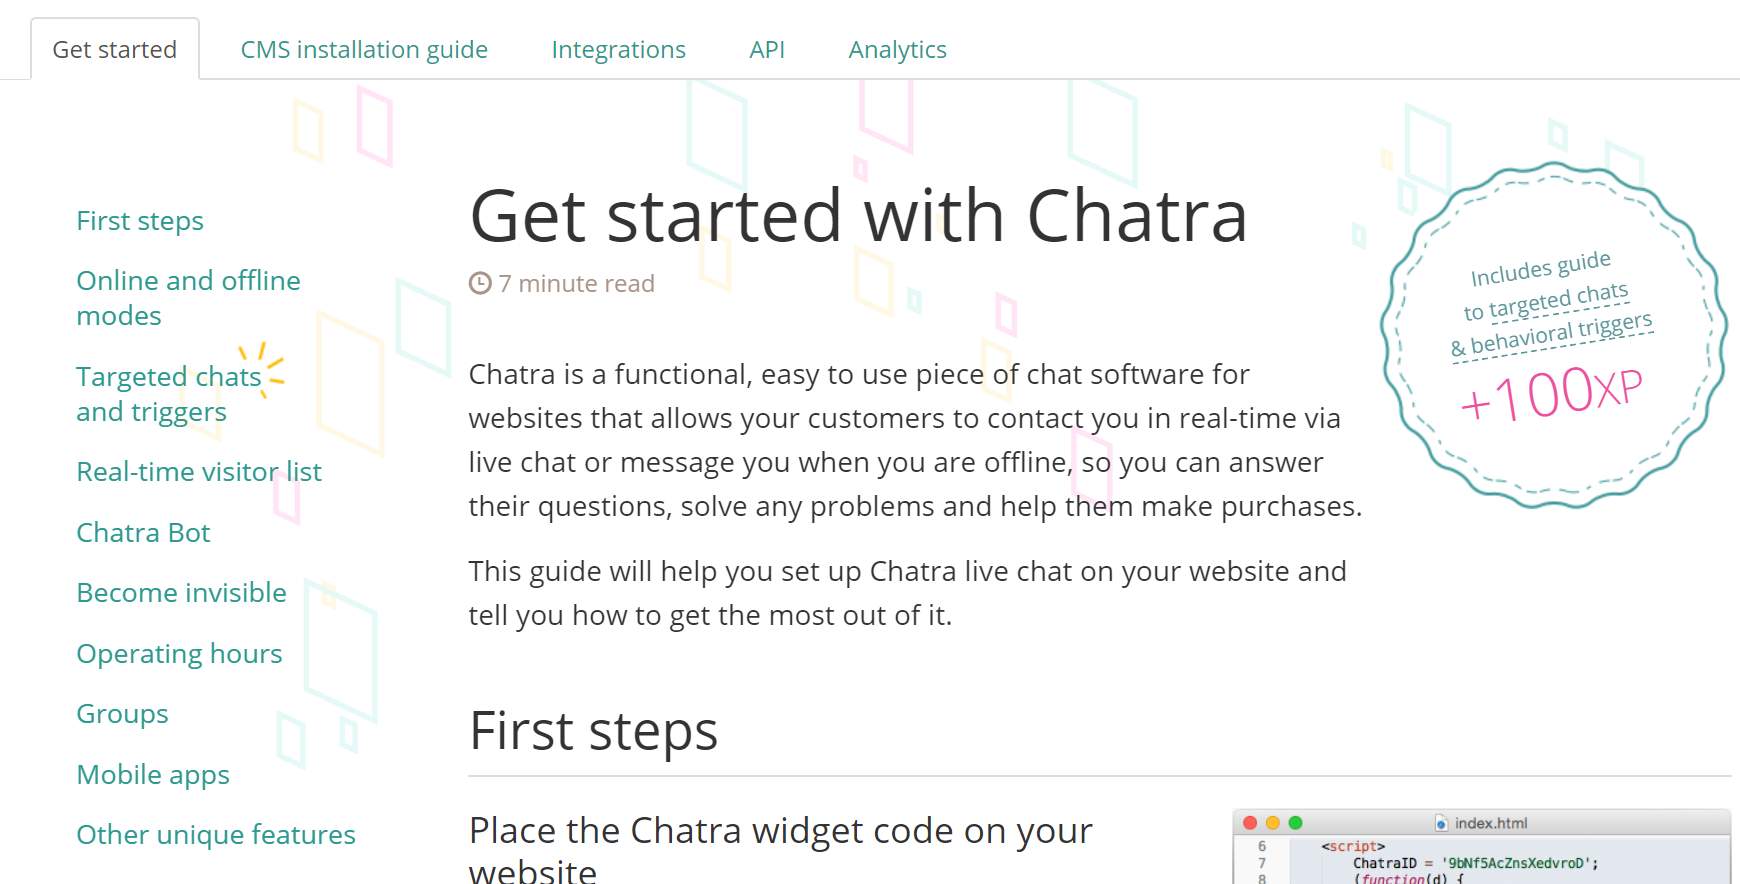 Chatra’s knowledge base